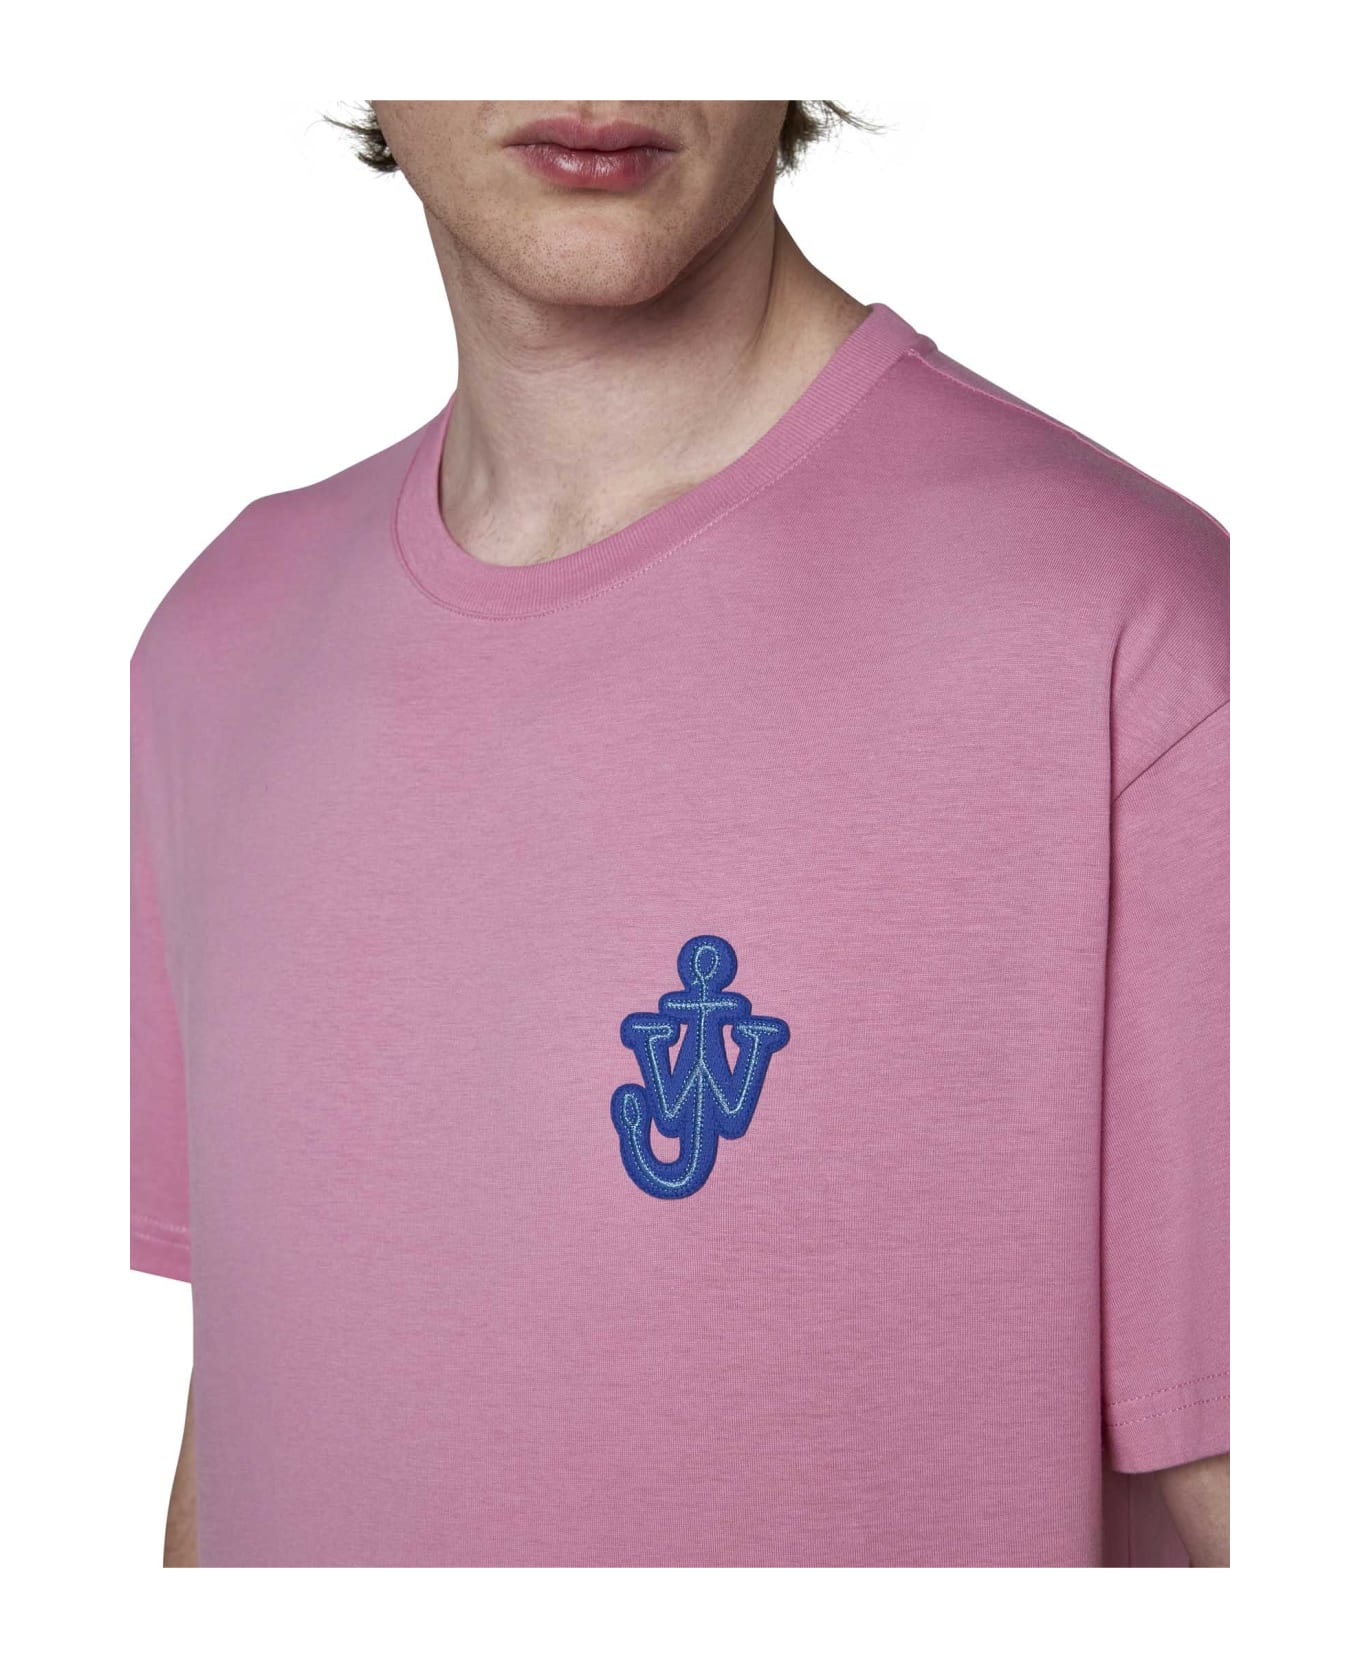 J.W. Anderson T-Shirt - Pink